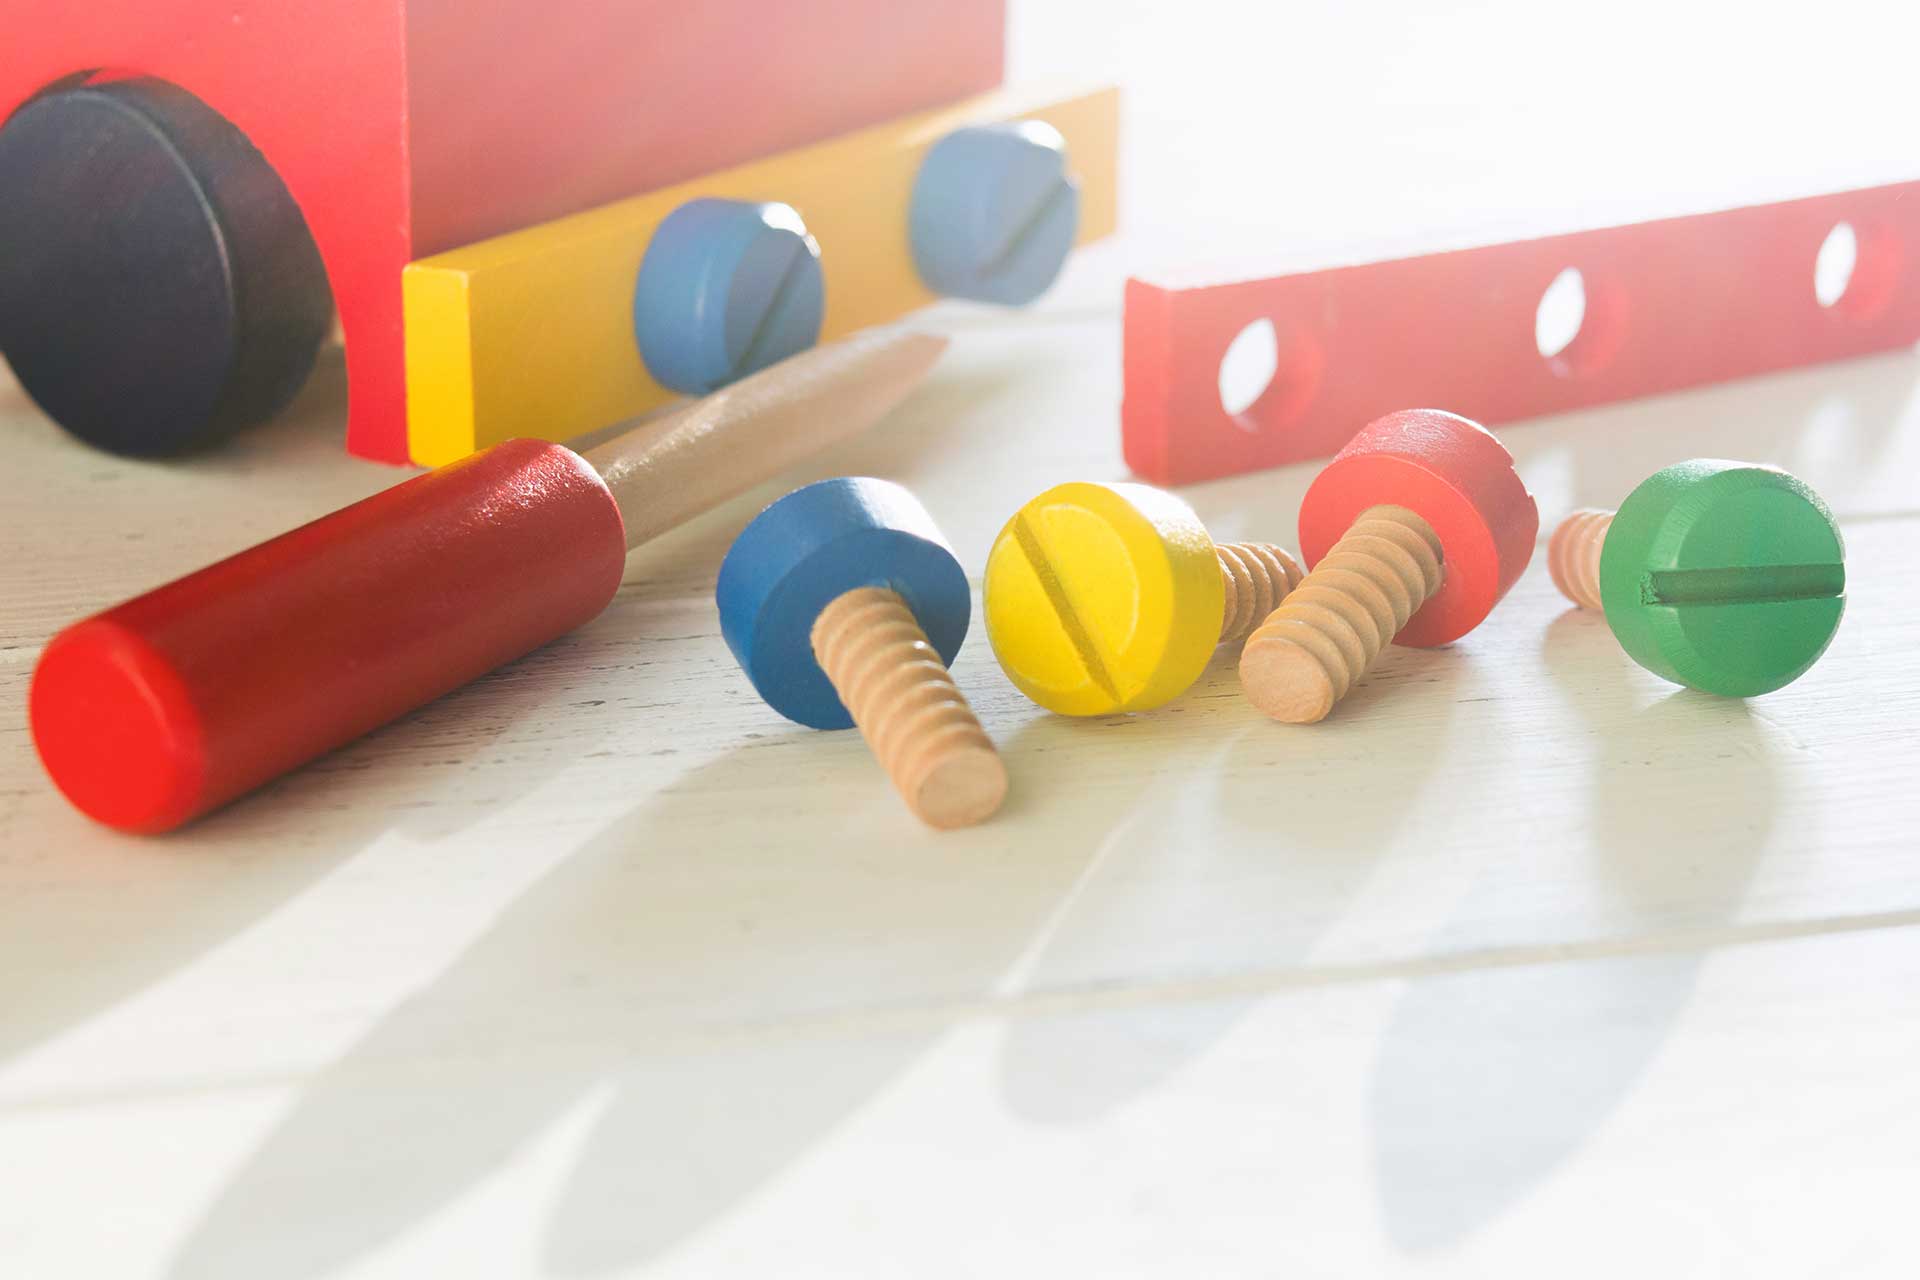 Children need to turn the rubber screw cap in and out, which can test the children's hand-eye coordination ability.